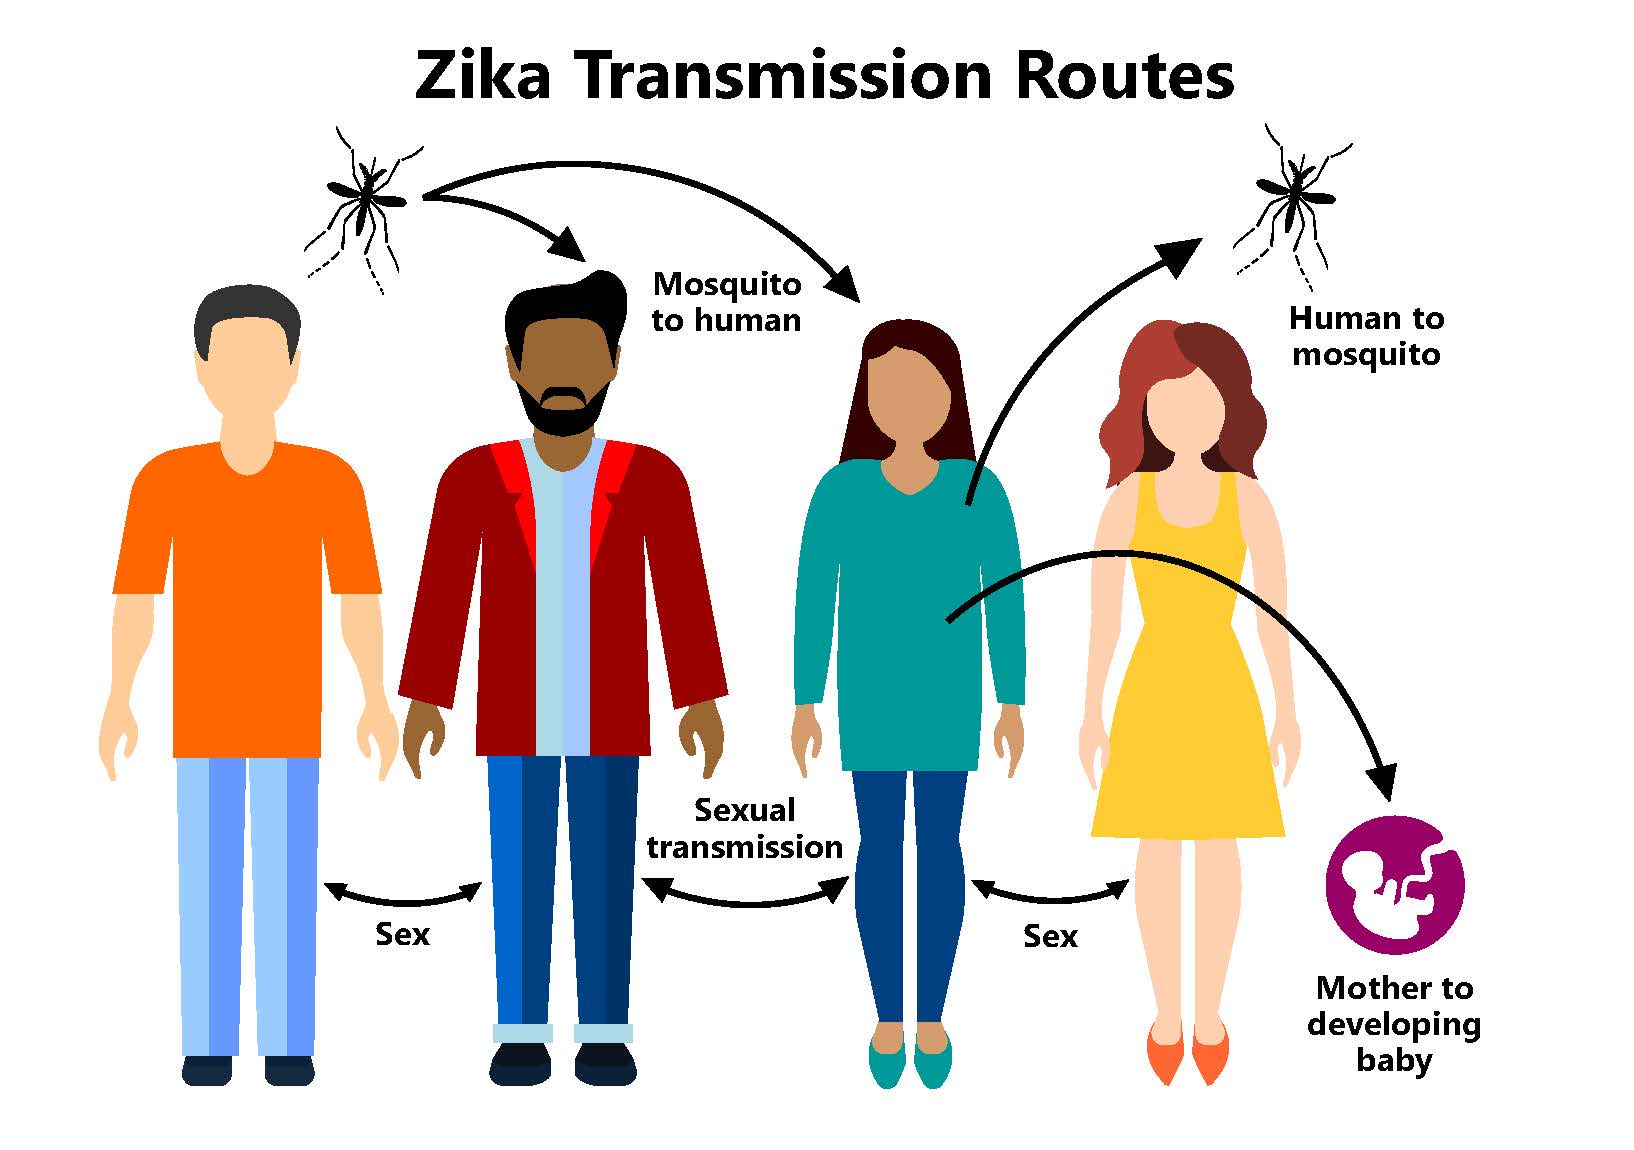 Zika spreads from mosquito bites, through sex (with male or female partners), and from a pregnant mother to developing baby.